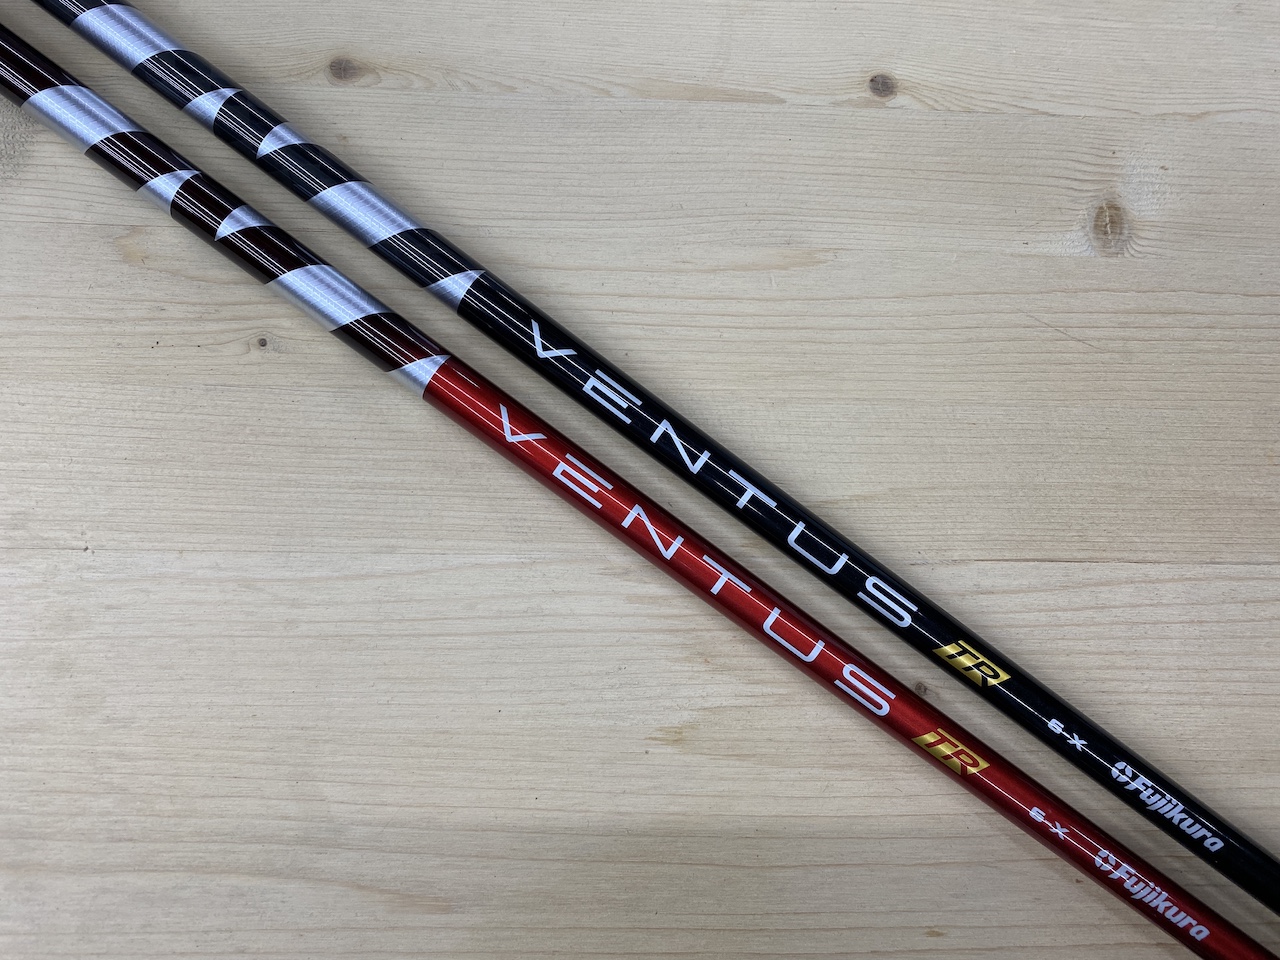 Review of the new Fujikura Ventus TR Red and Black shafts! – GolfWRX